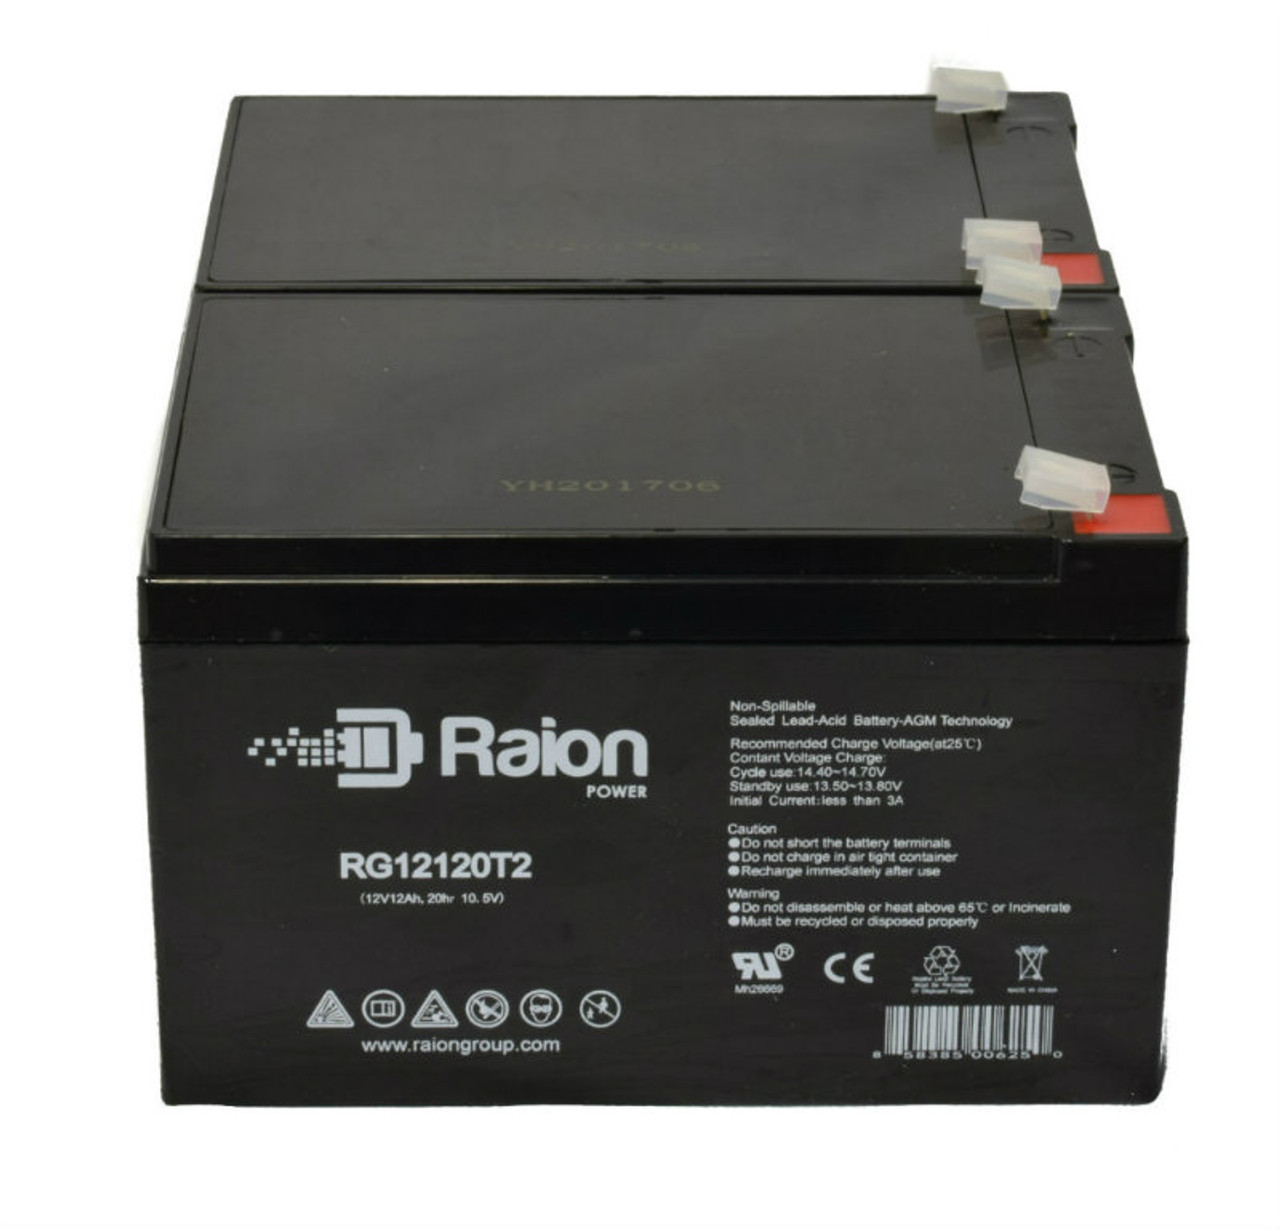 Raion Power RG12120T2 Replacement Fire Alarm Control Panel Battery for Altronix AL1024ULM - 2 Pack